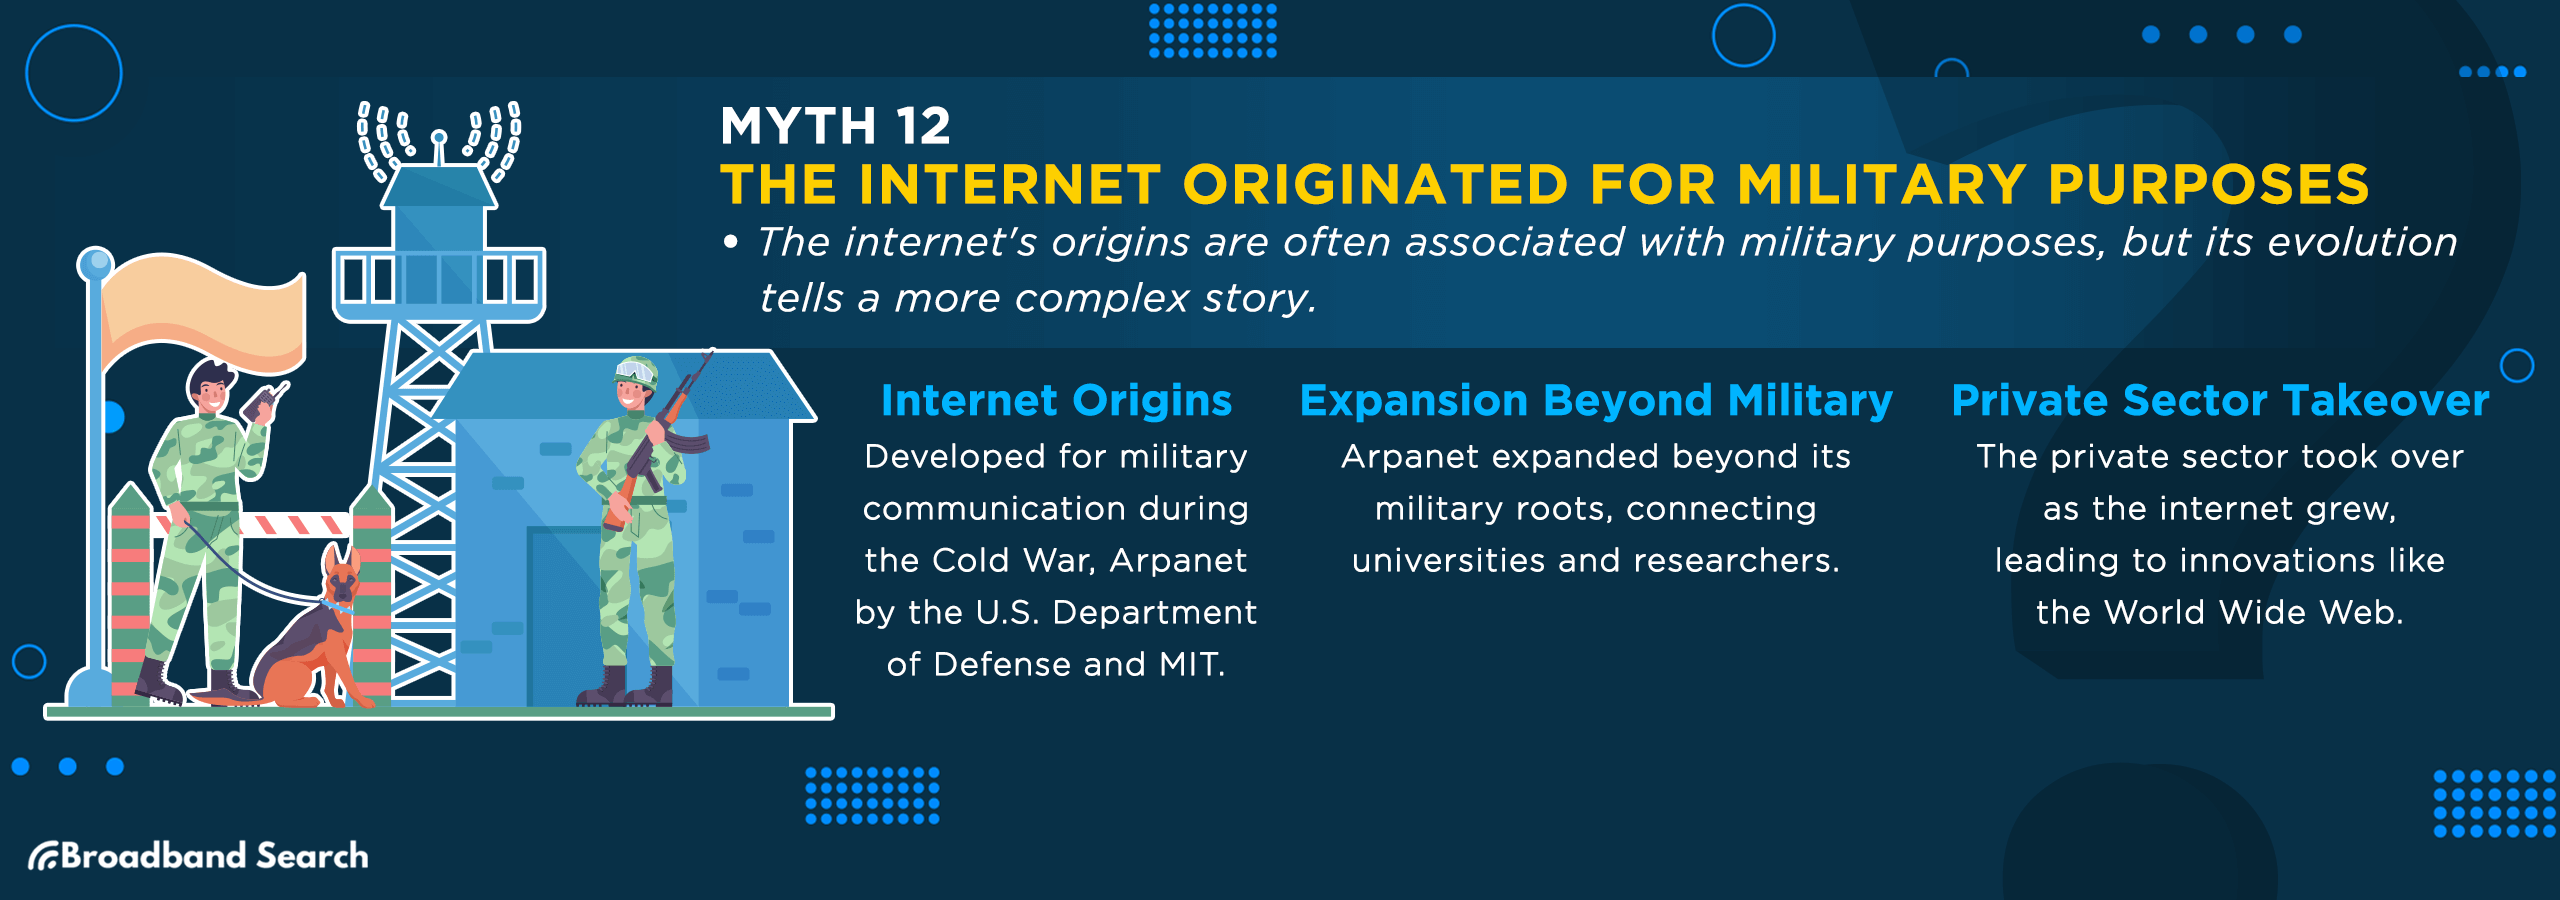 12th internet myth, the internet originated for military purposes